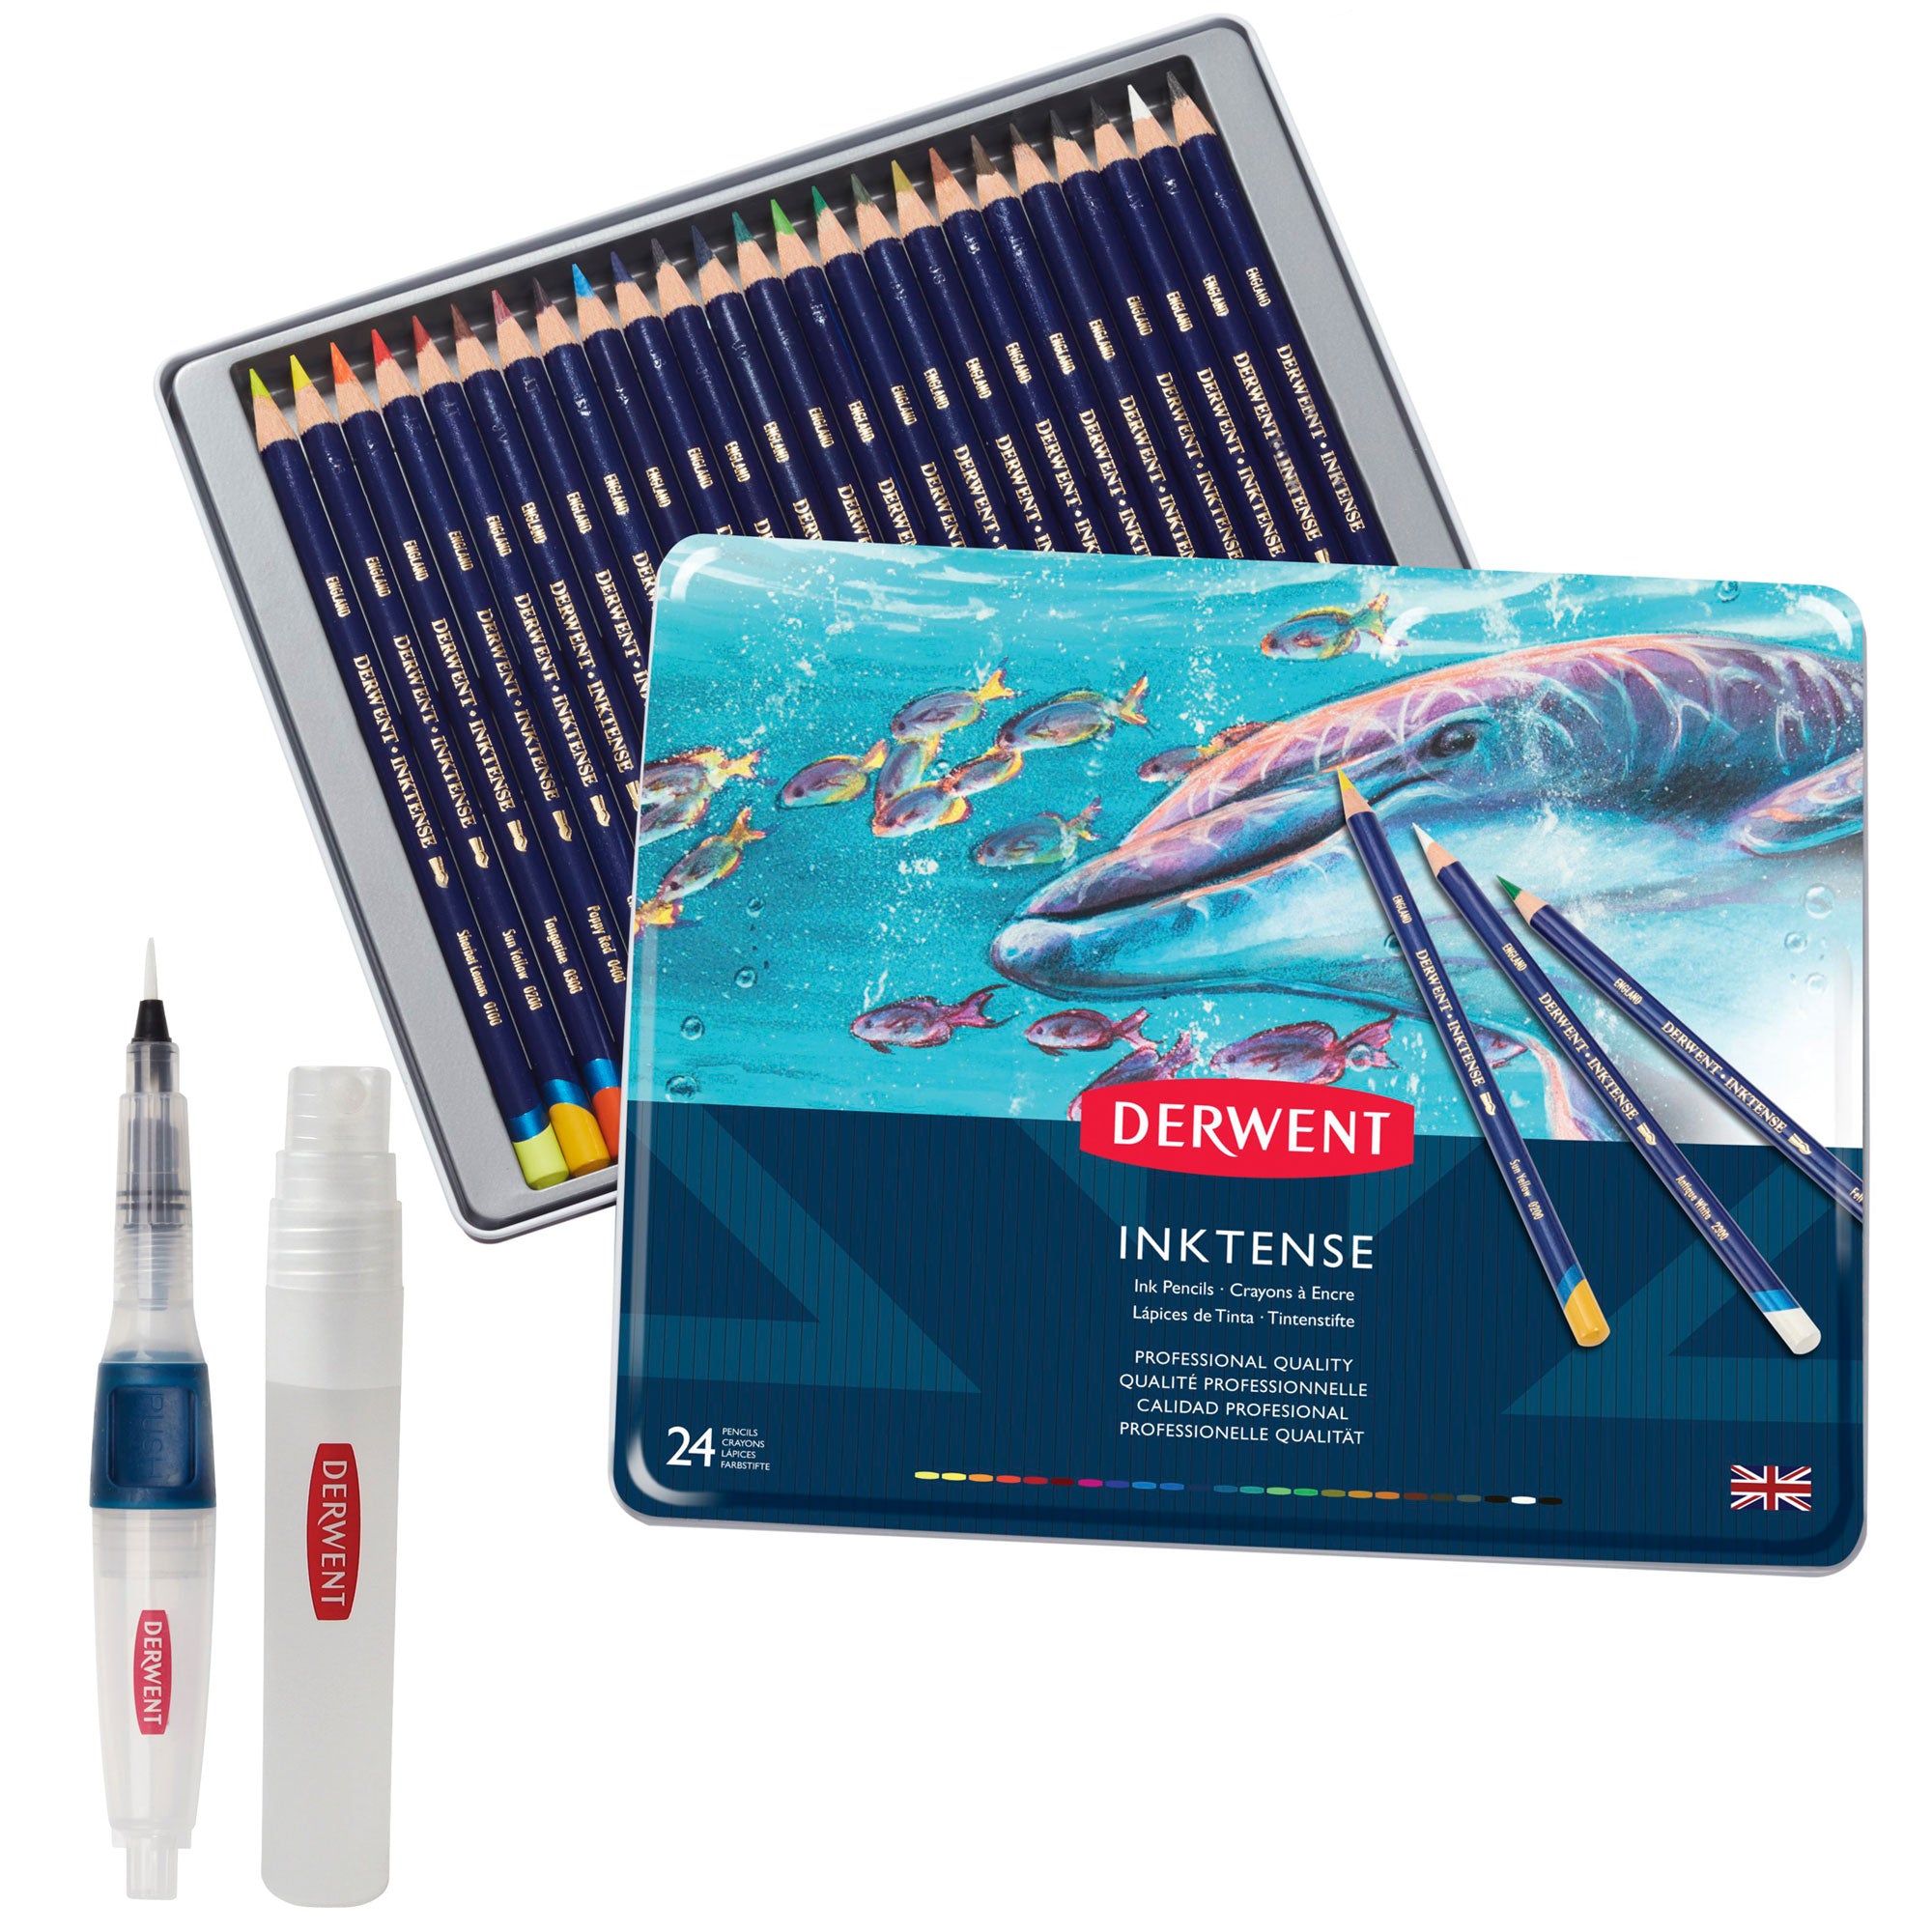 Derwent Inktense pencils are highly pigmented, intensely vibrant, watercolour pencils that are permanent when fully dry